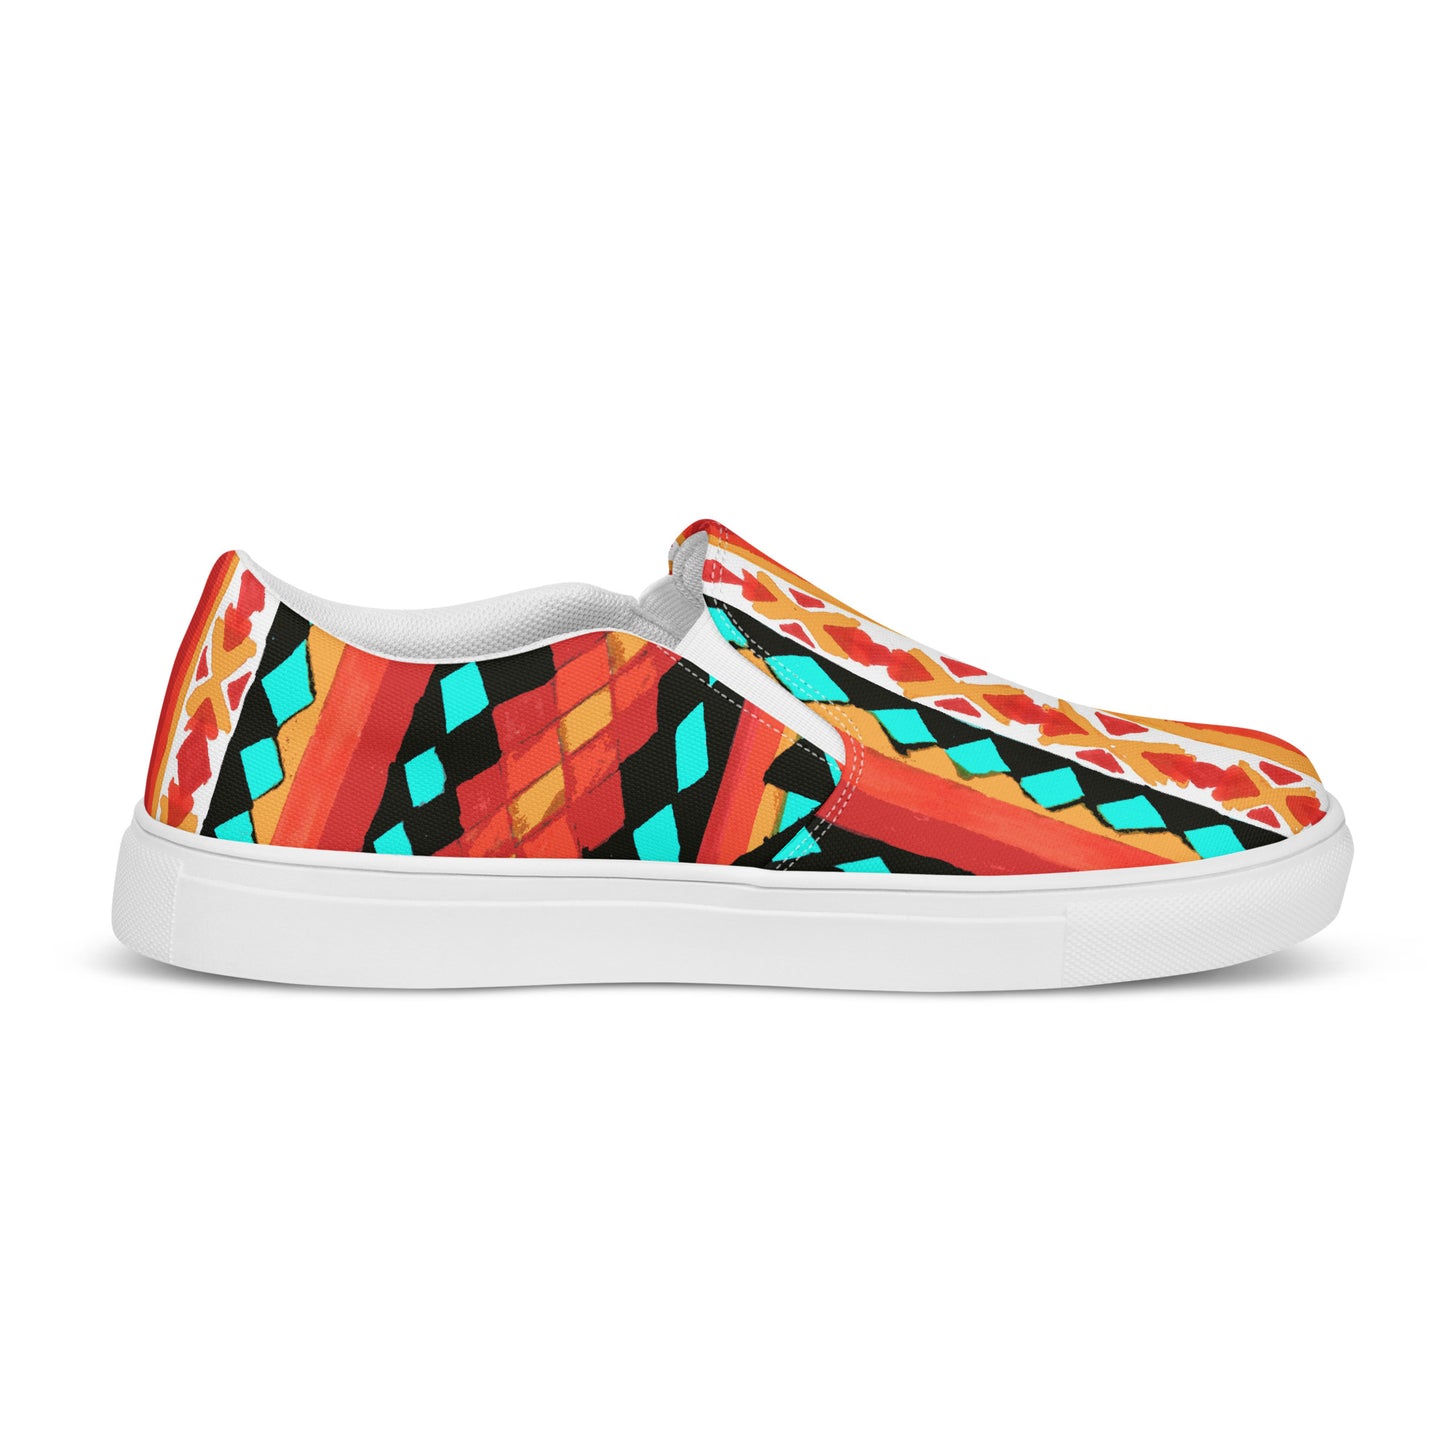 KYEH! Turquoise Women’s Slip-Ons